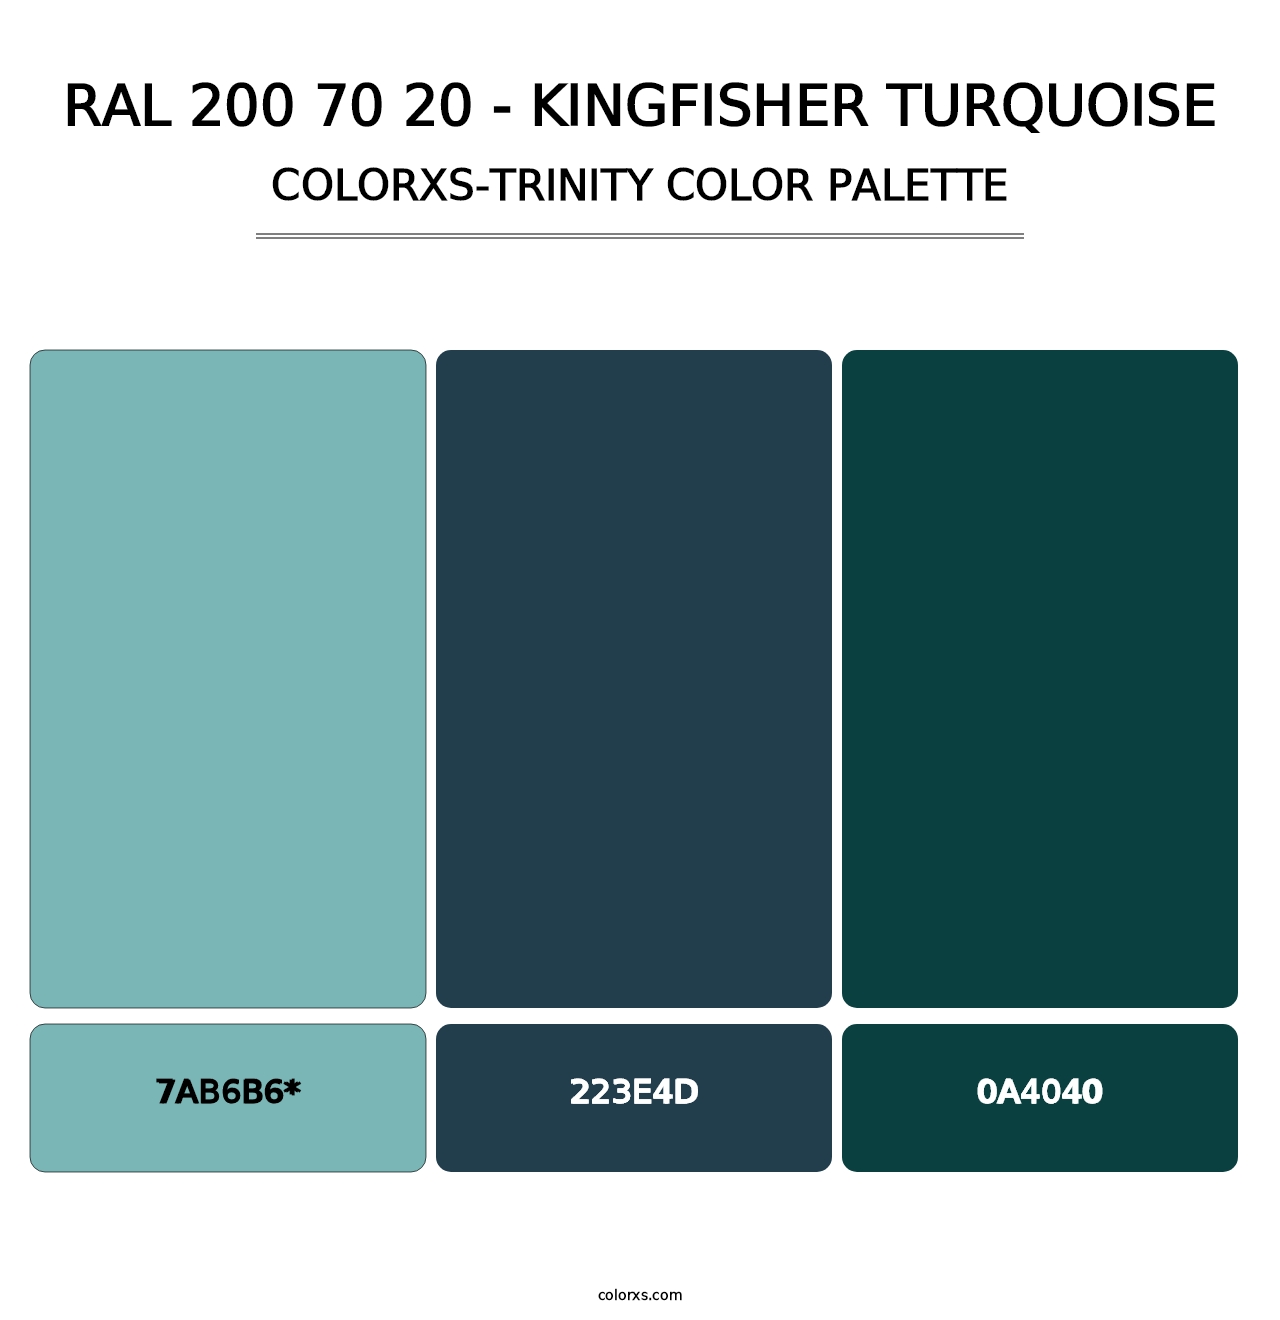 RAL 200 70 20 - Kingfisher Turquoise - Colorxs Trinity Palette